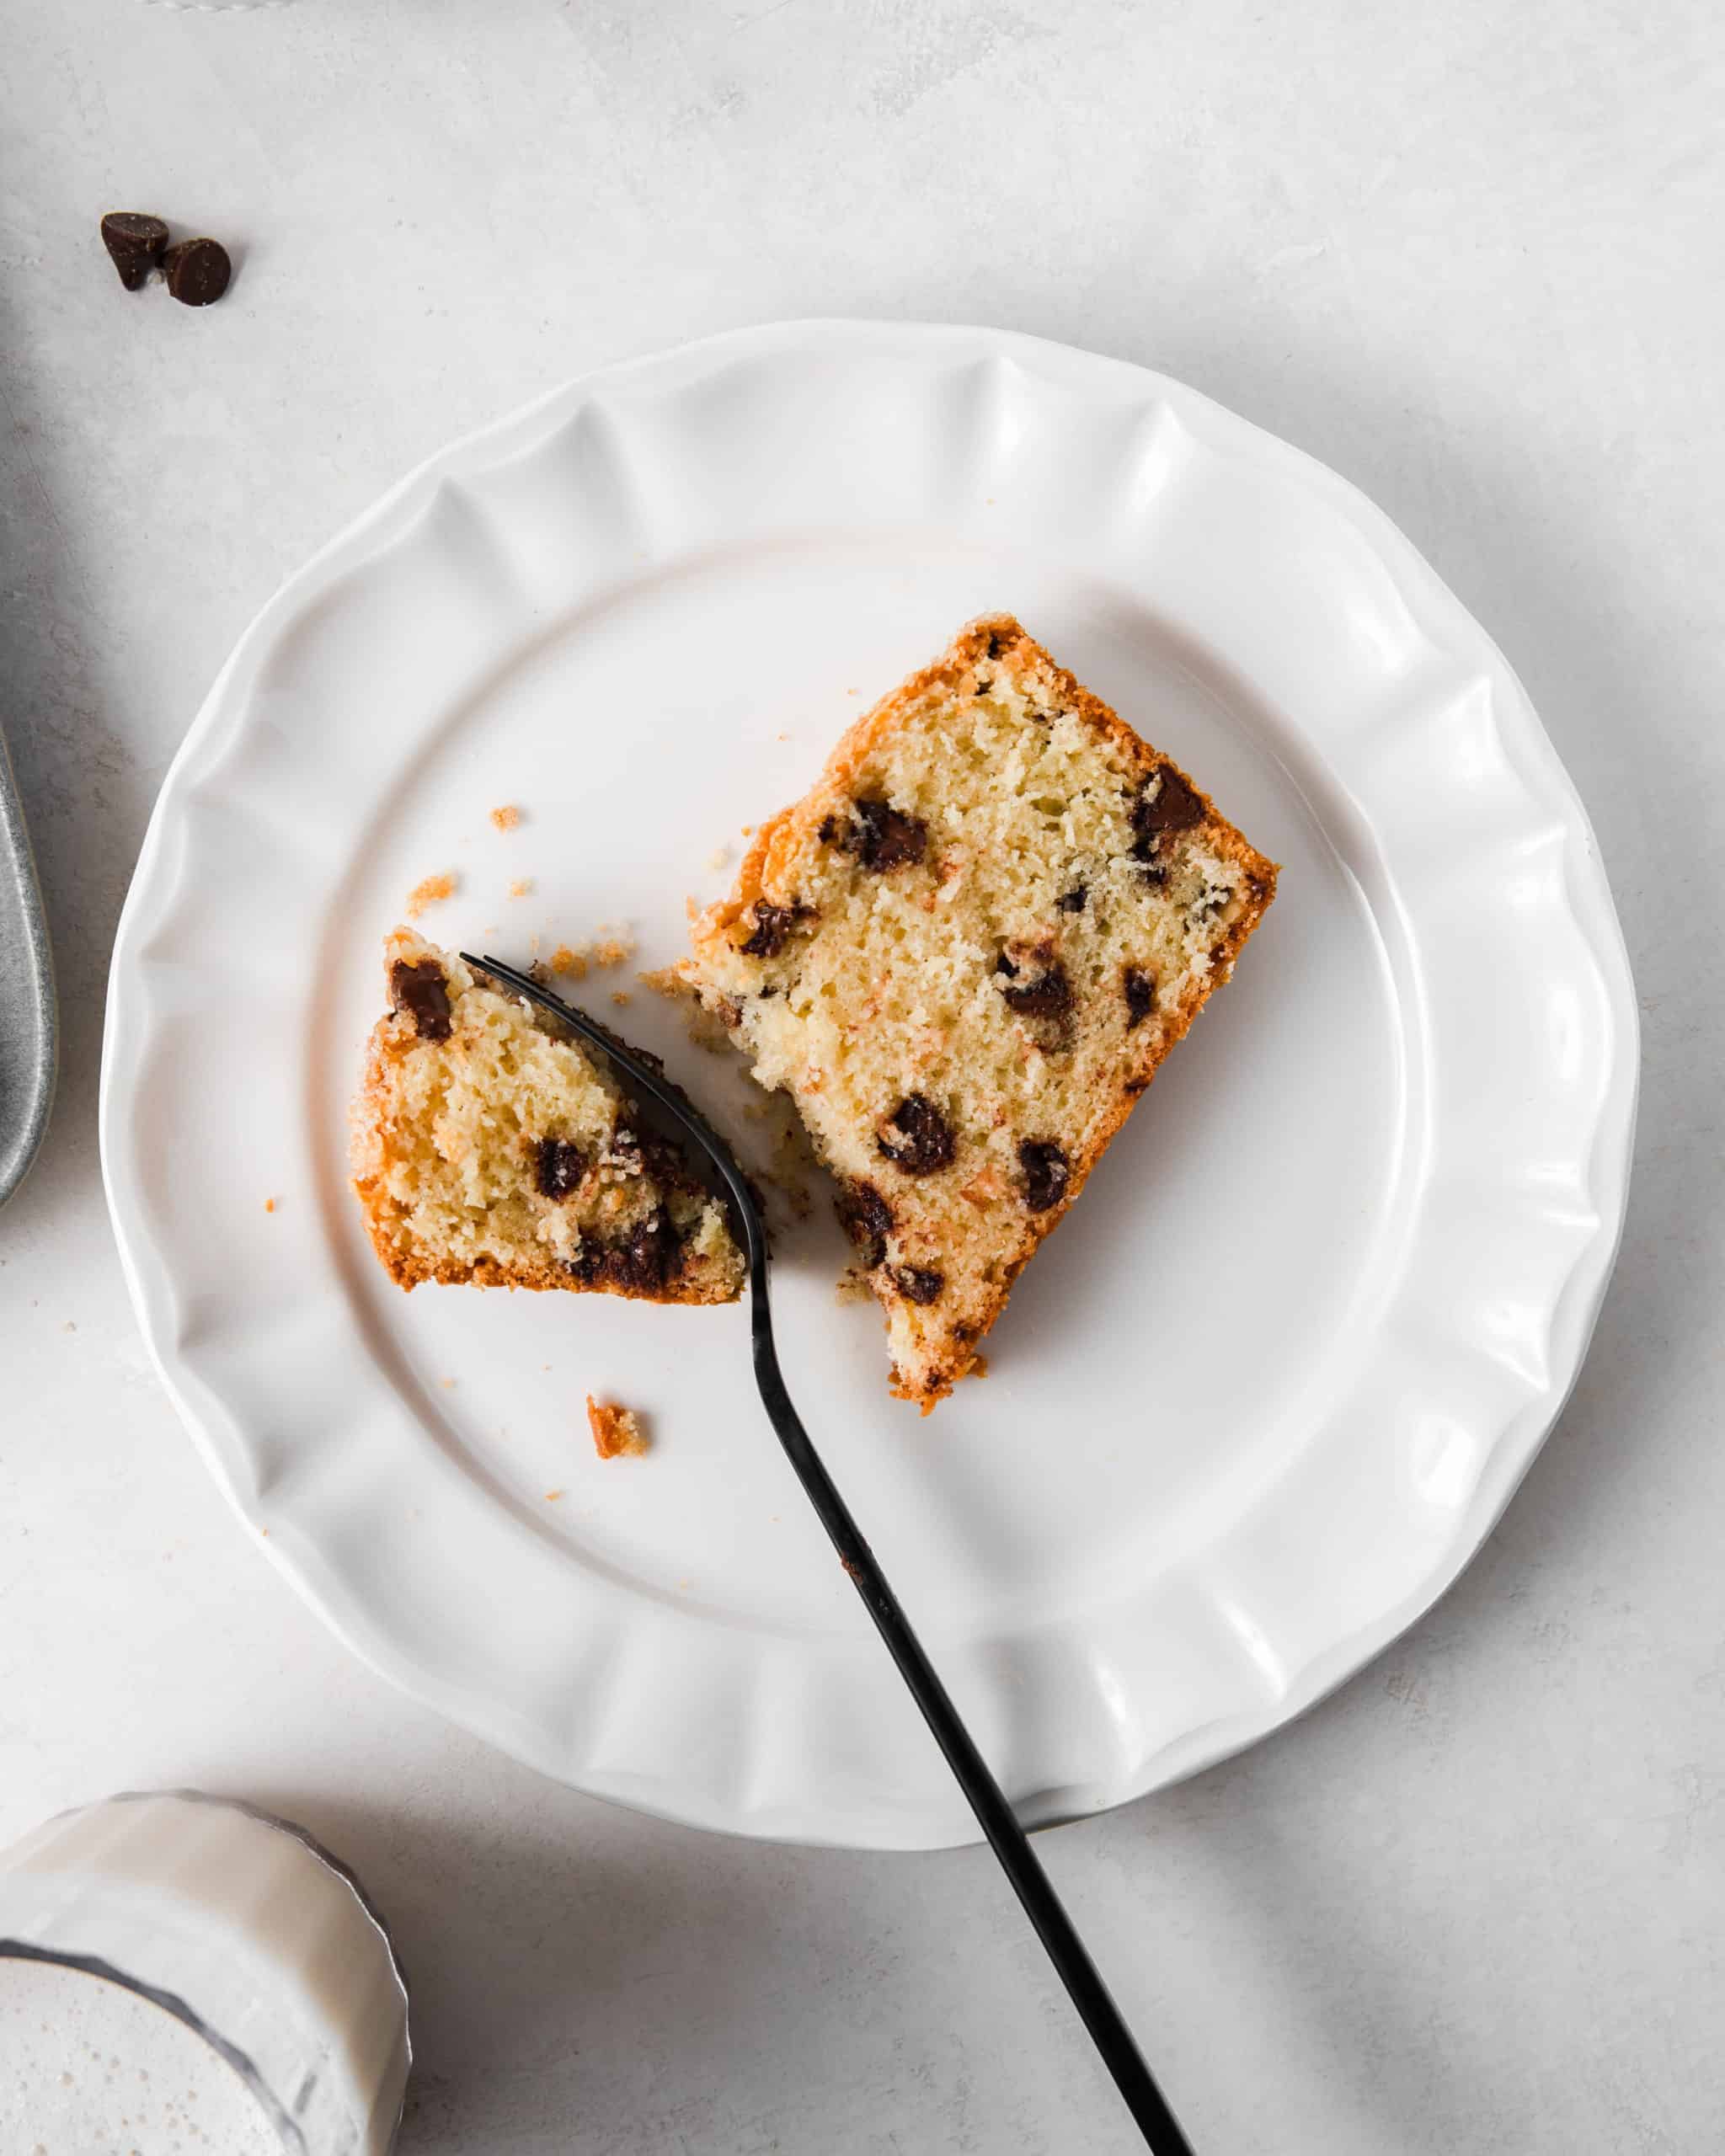 A sliced of Chocolate Chip Loaf Cake